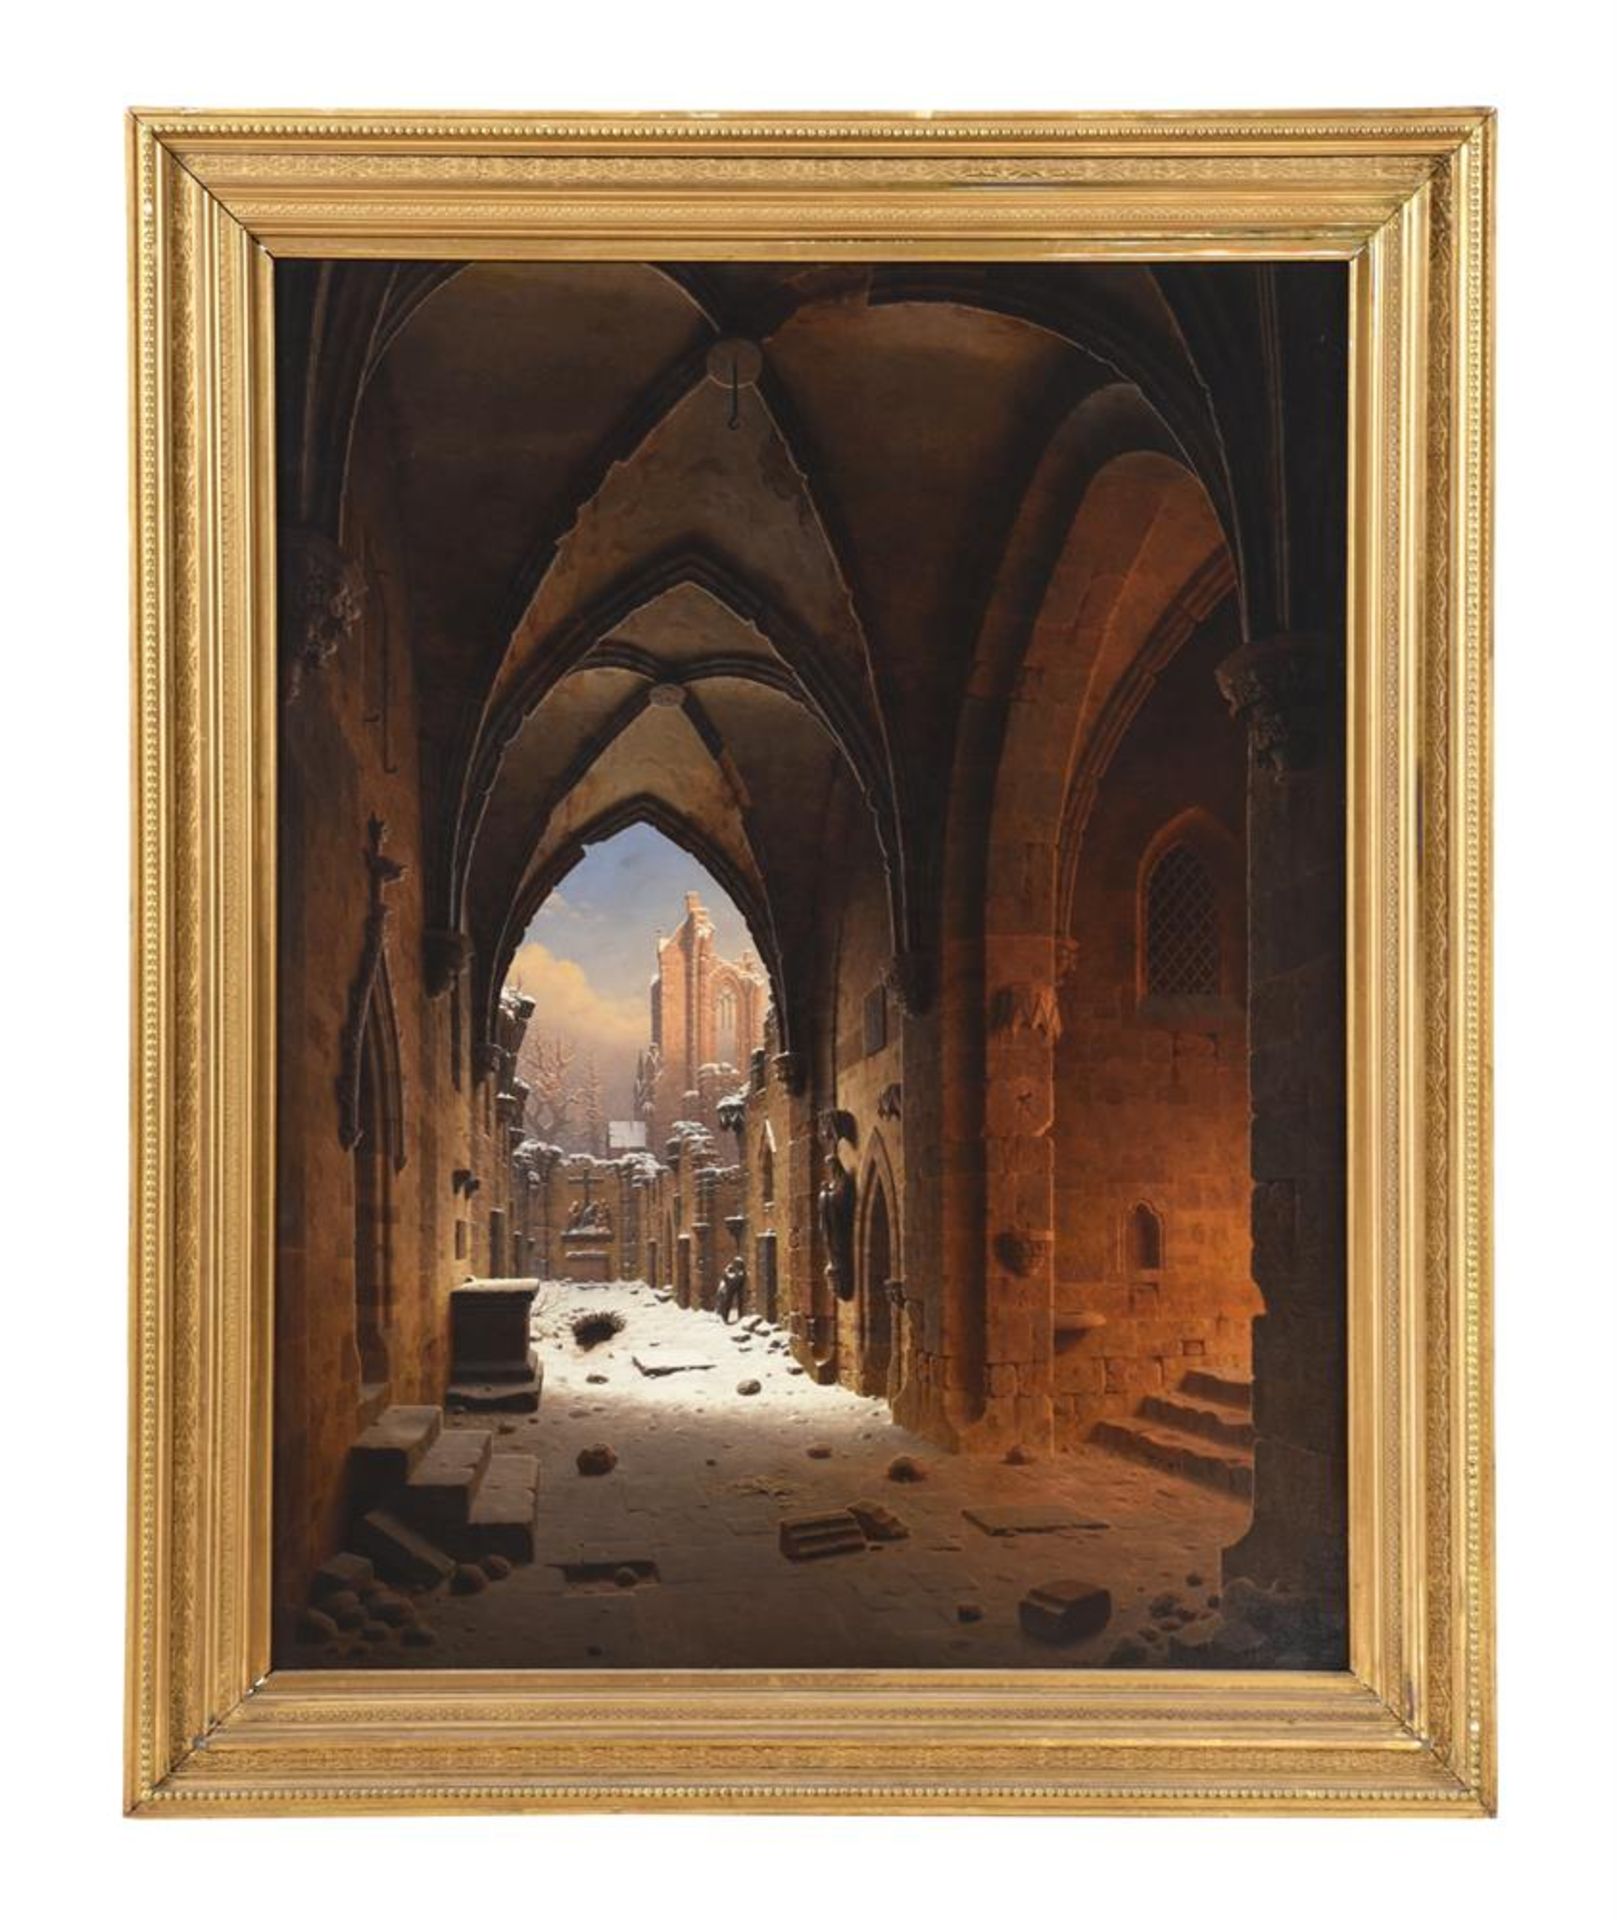 CARL GEORG ADOLPH HASENPFLUG (GERMAN 1802-1858), CLOISTER RUINS IN FADING LIGHT ON A WINTERS DAY - Image 2 of 6